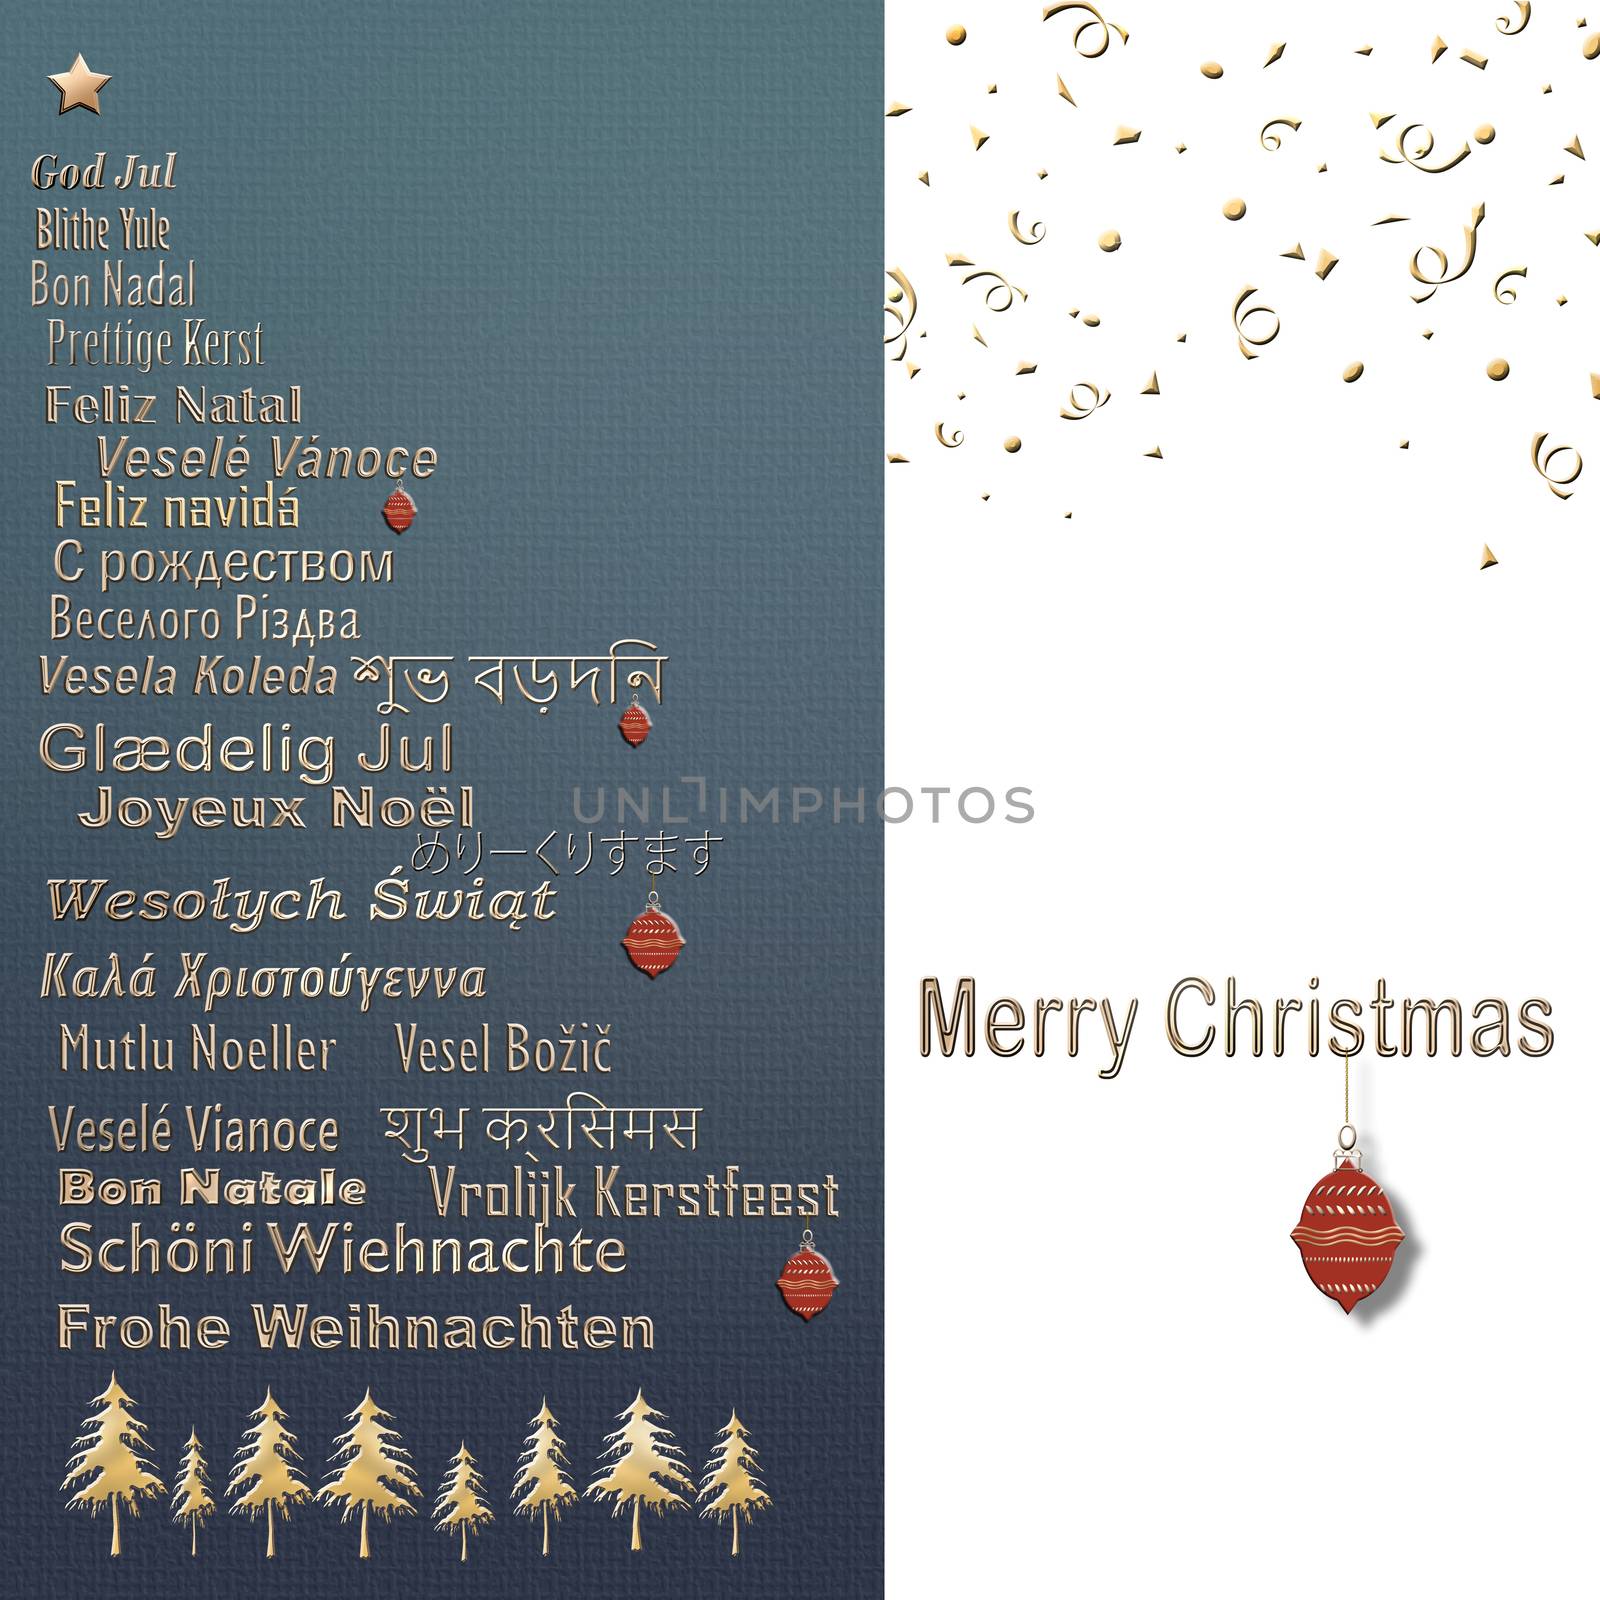 Merry Christmas greeting card in different languages by NelliPolk